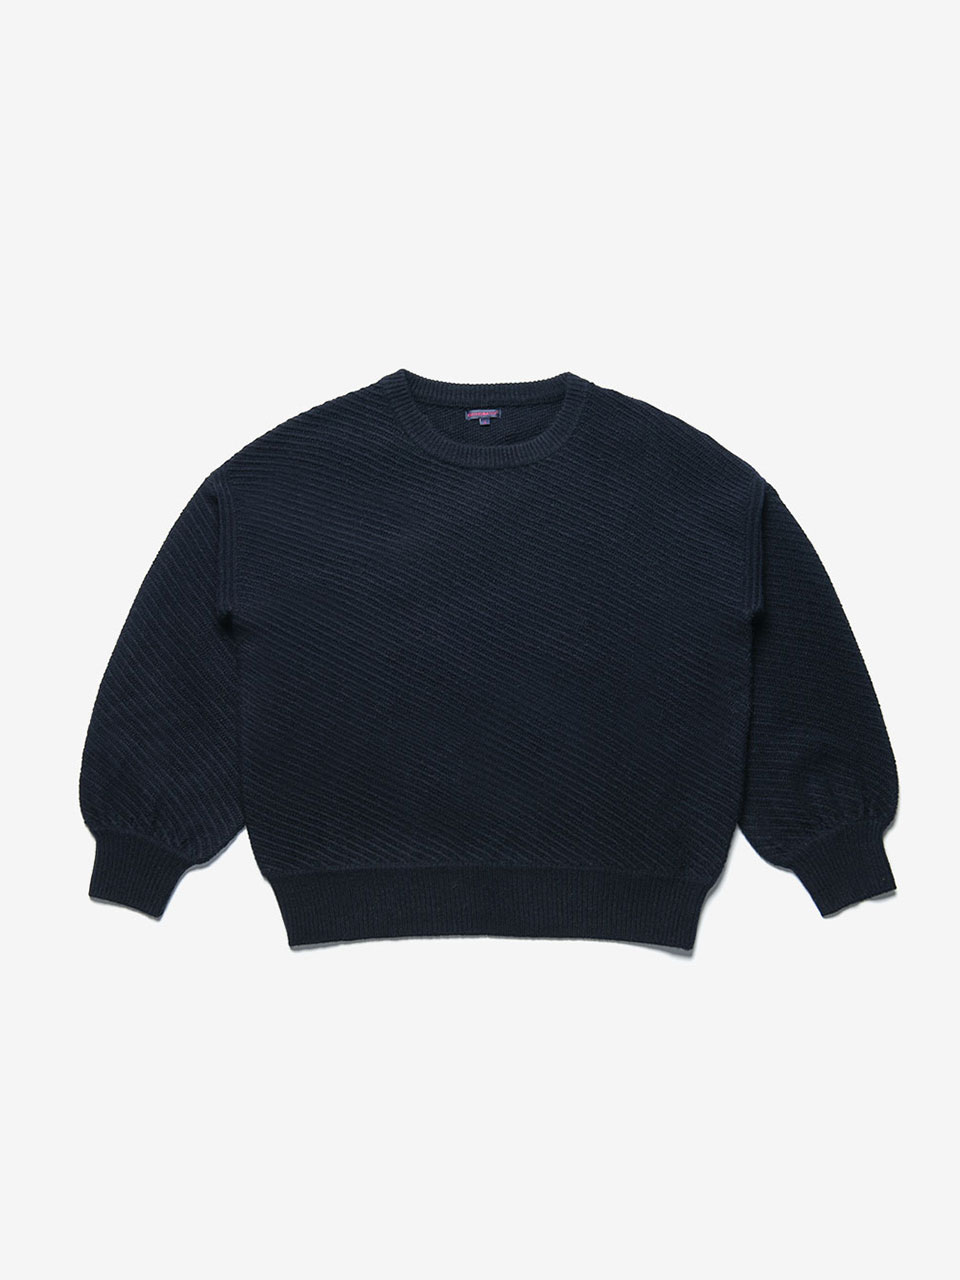 [PARIS COLLECTION] KNIT PULL DIANDRO - NAVY